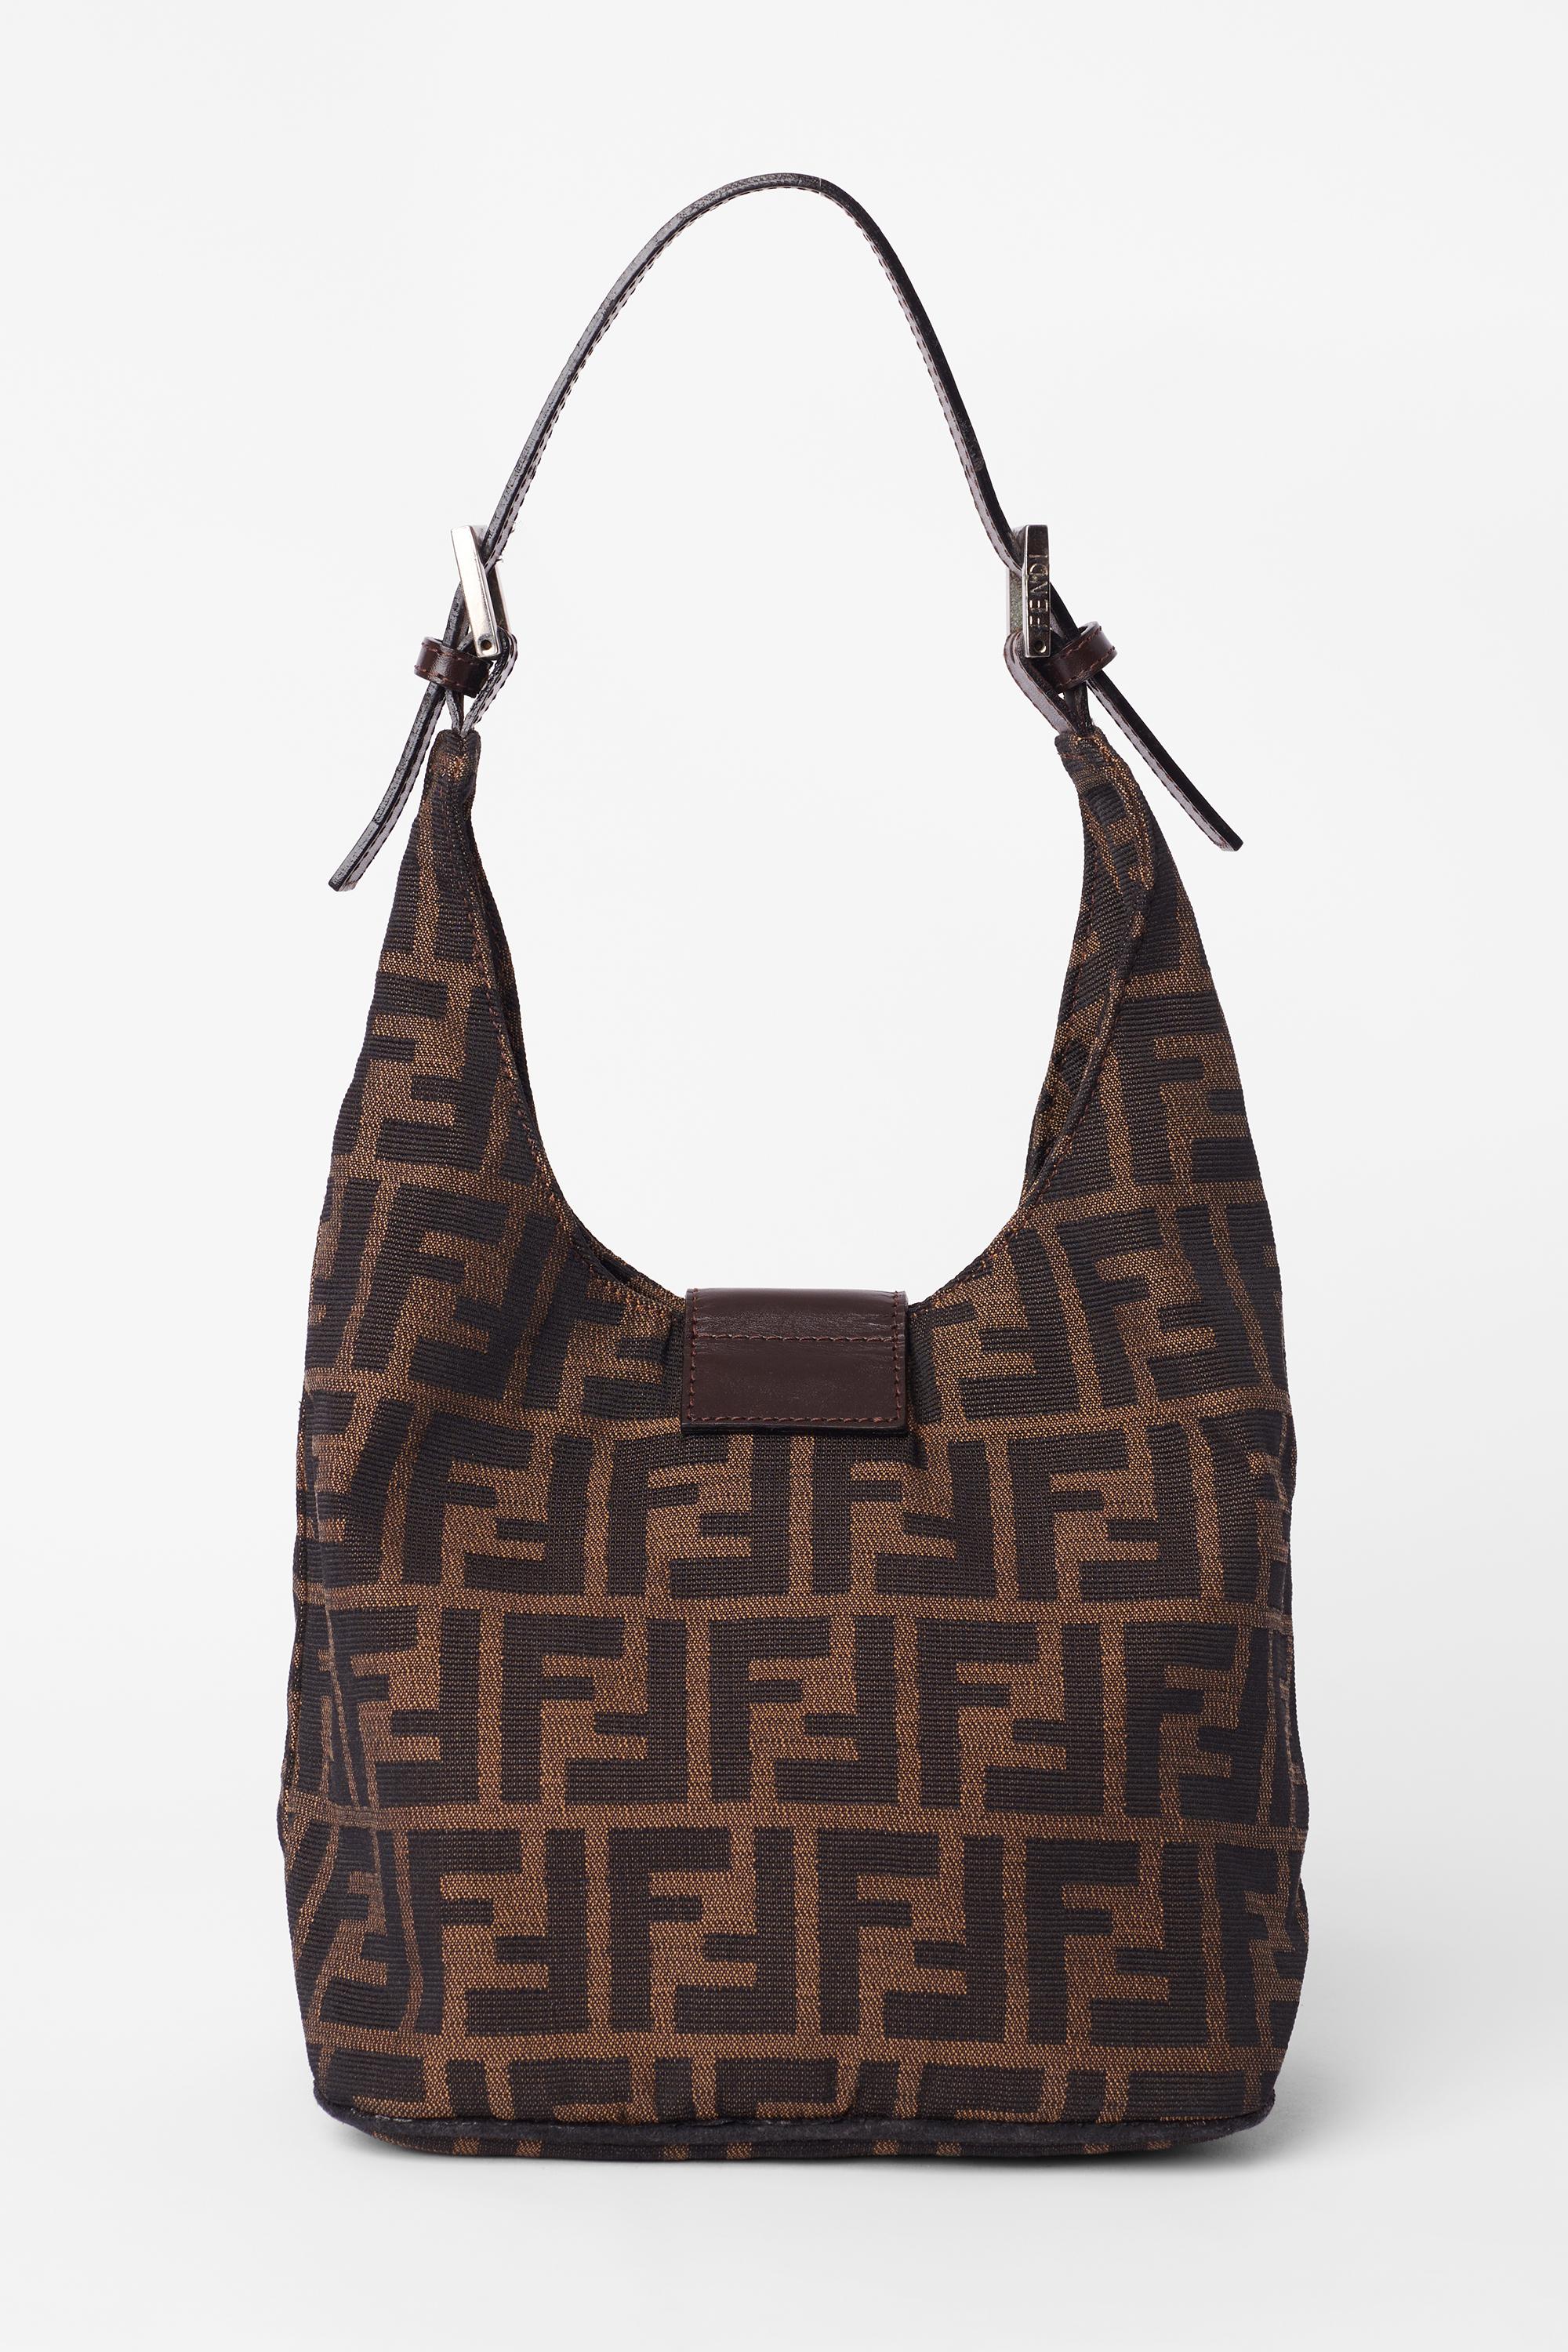 Vintage 1990’s Brown Zucca Print Croissant Bag In Excellent Condition For Sale In London, GB